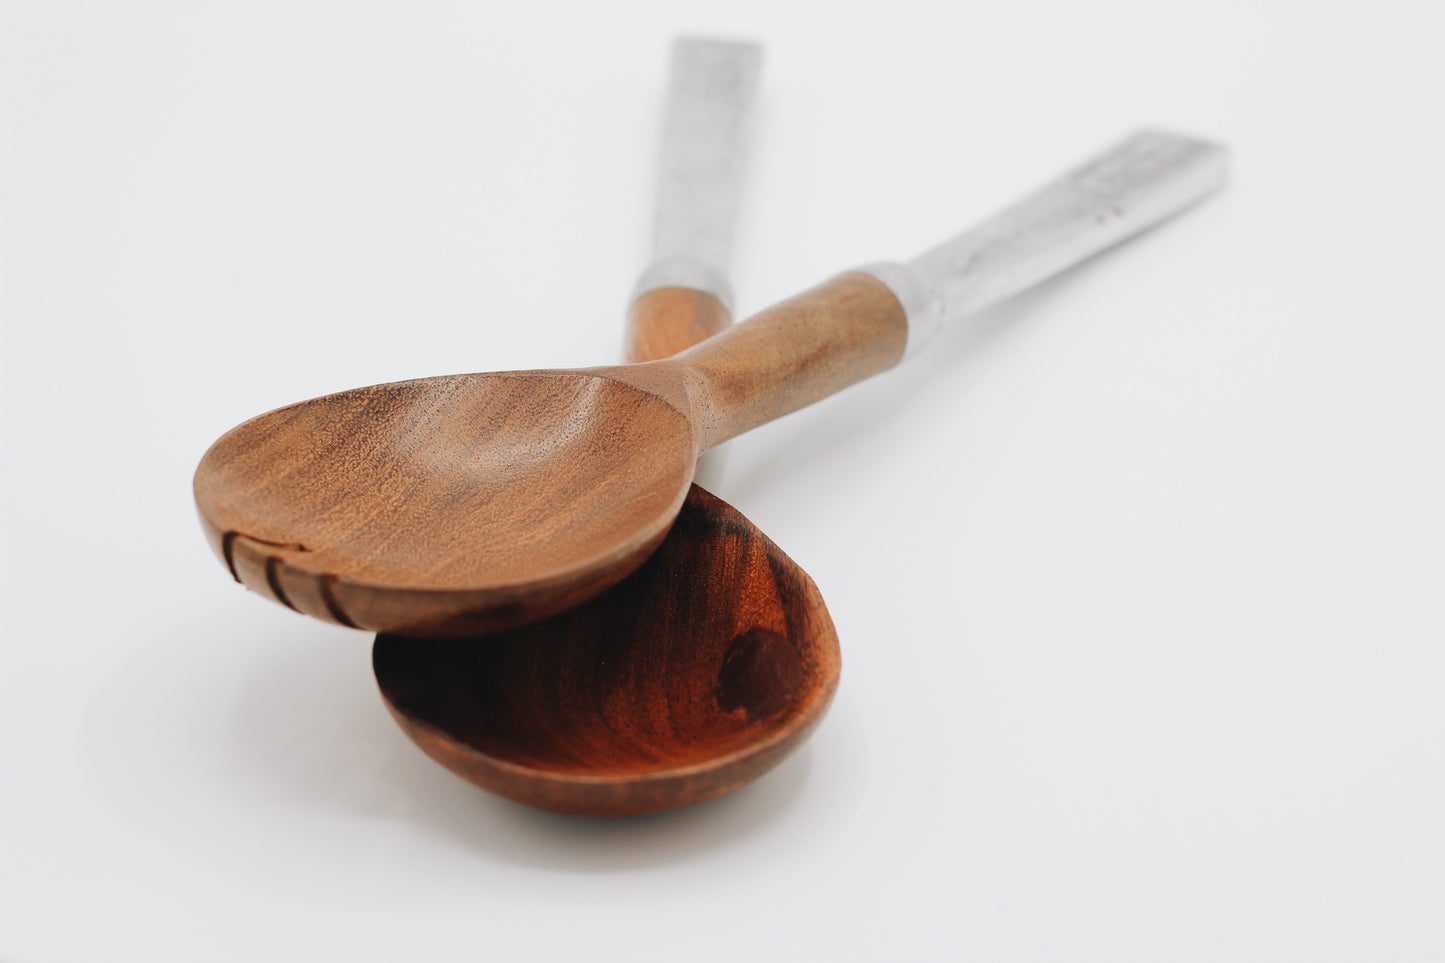 Wooden and Pewter Salad Servers